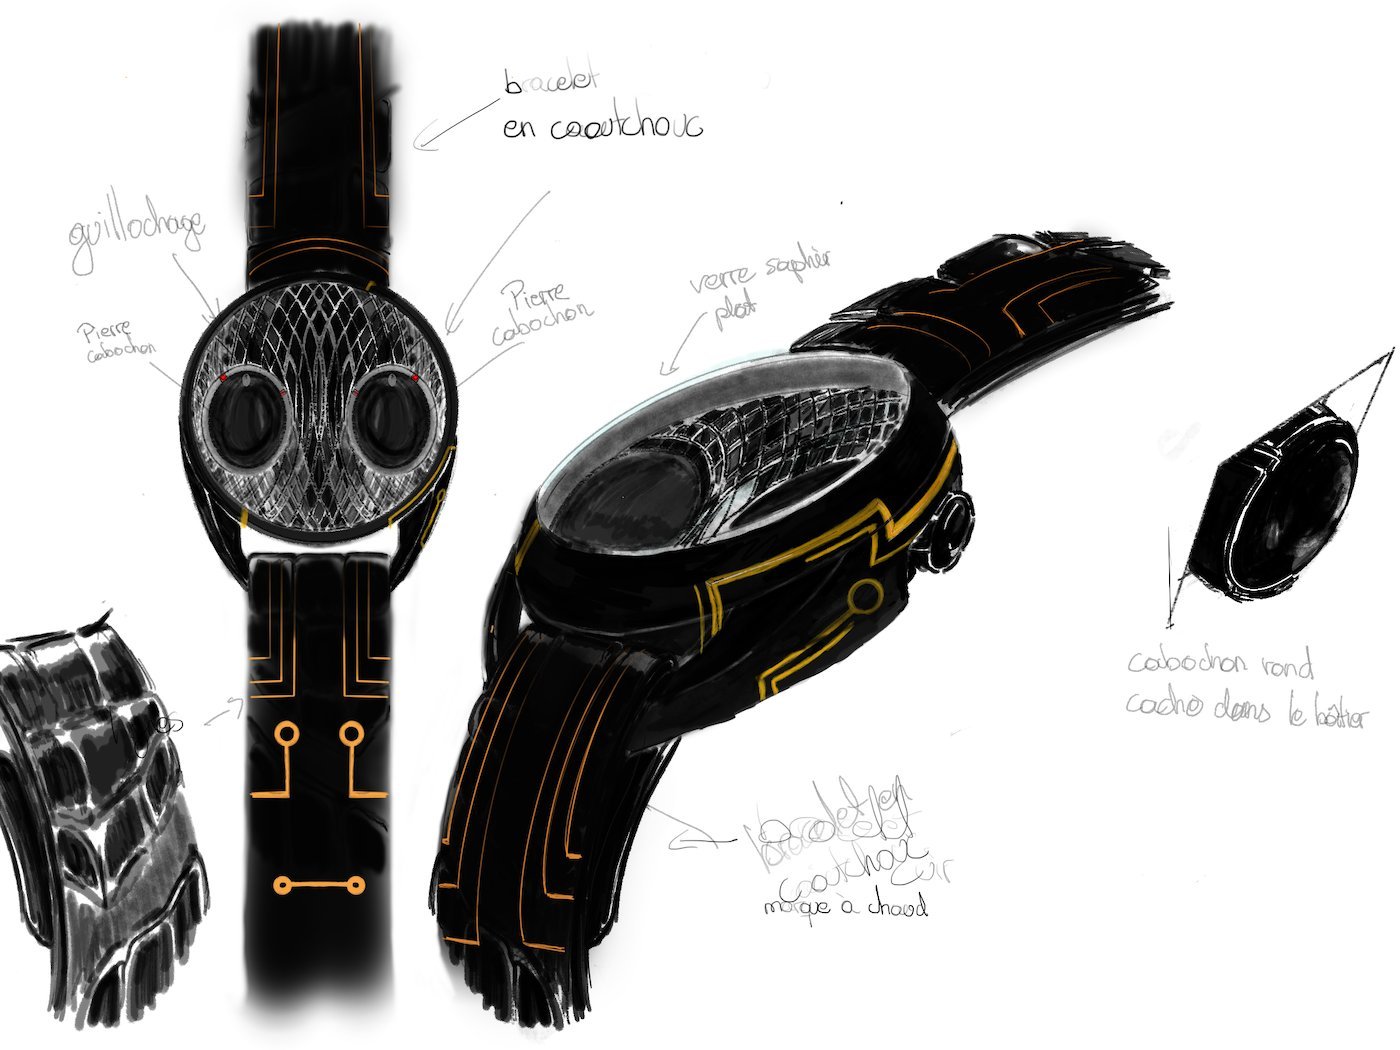 The watch inspired by ants